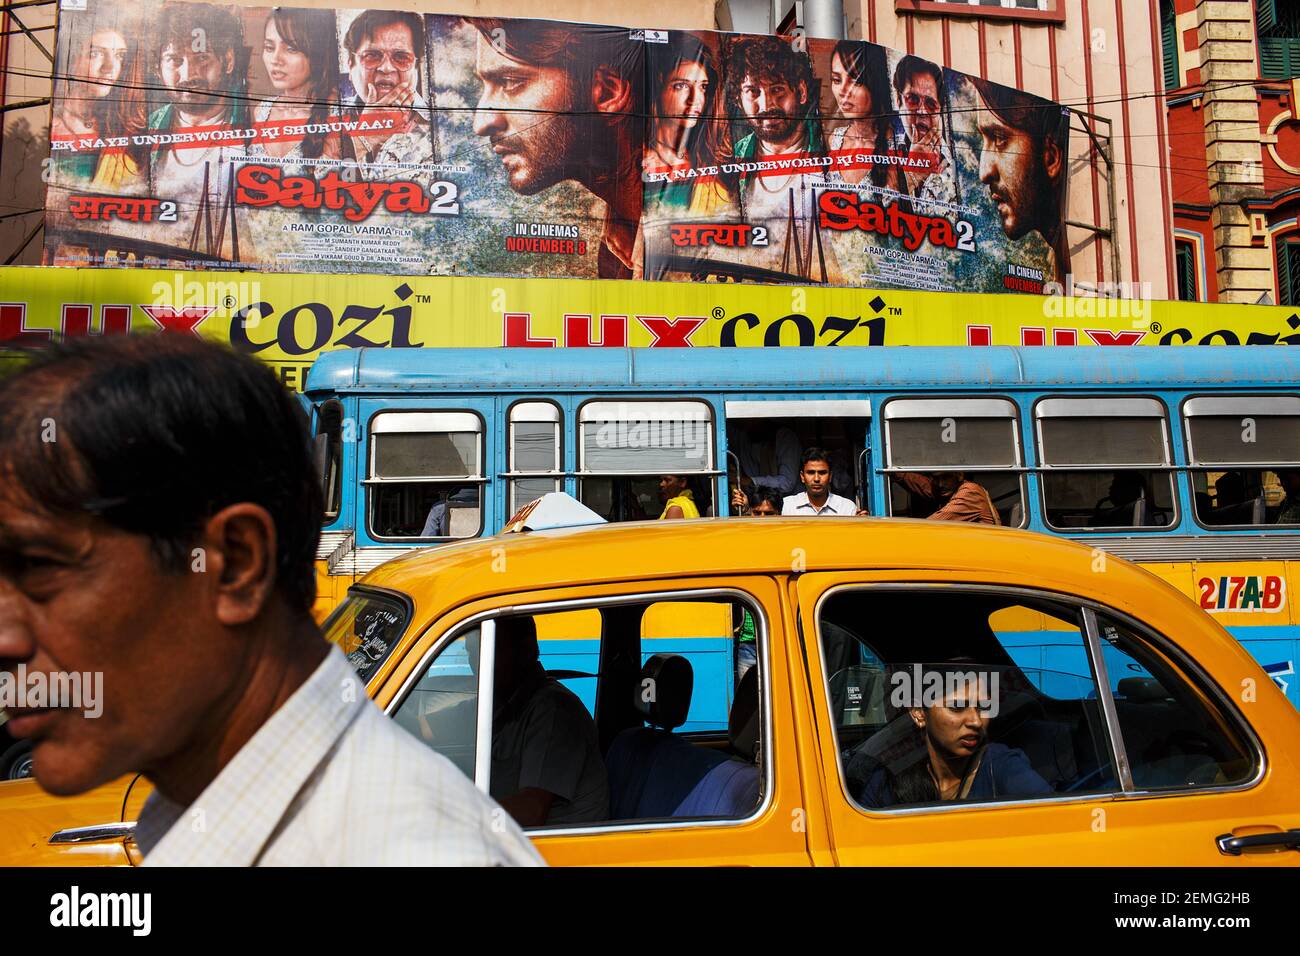 Street scene with a yellow taxi Ambassador, bus and people in central Kolkata, India. Stock Photo